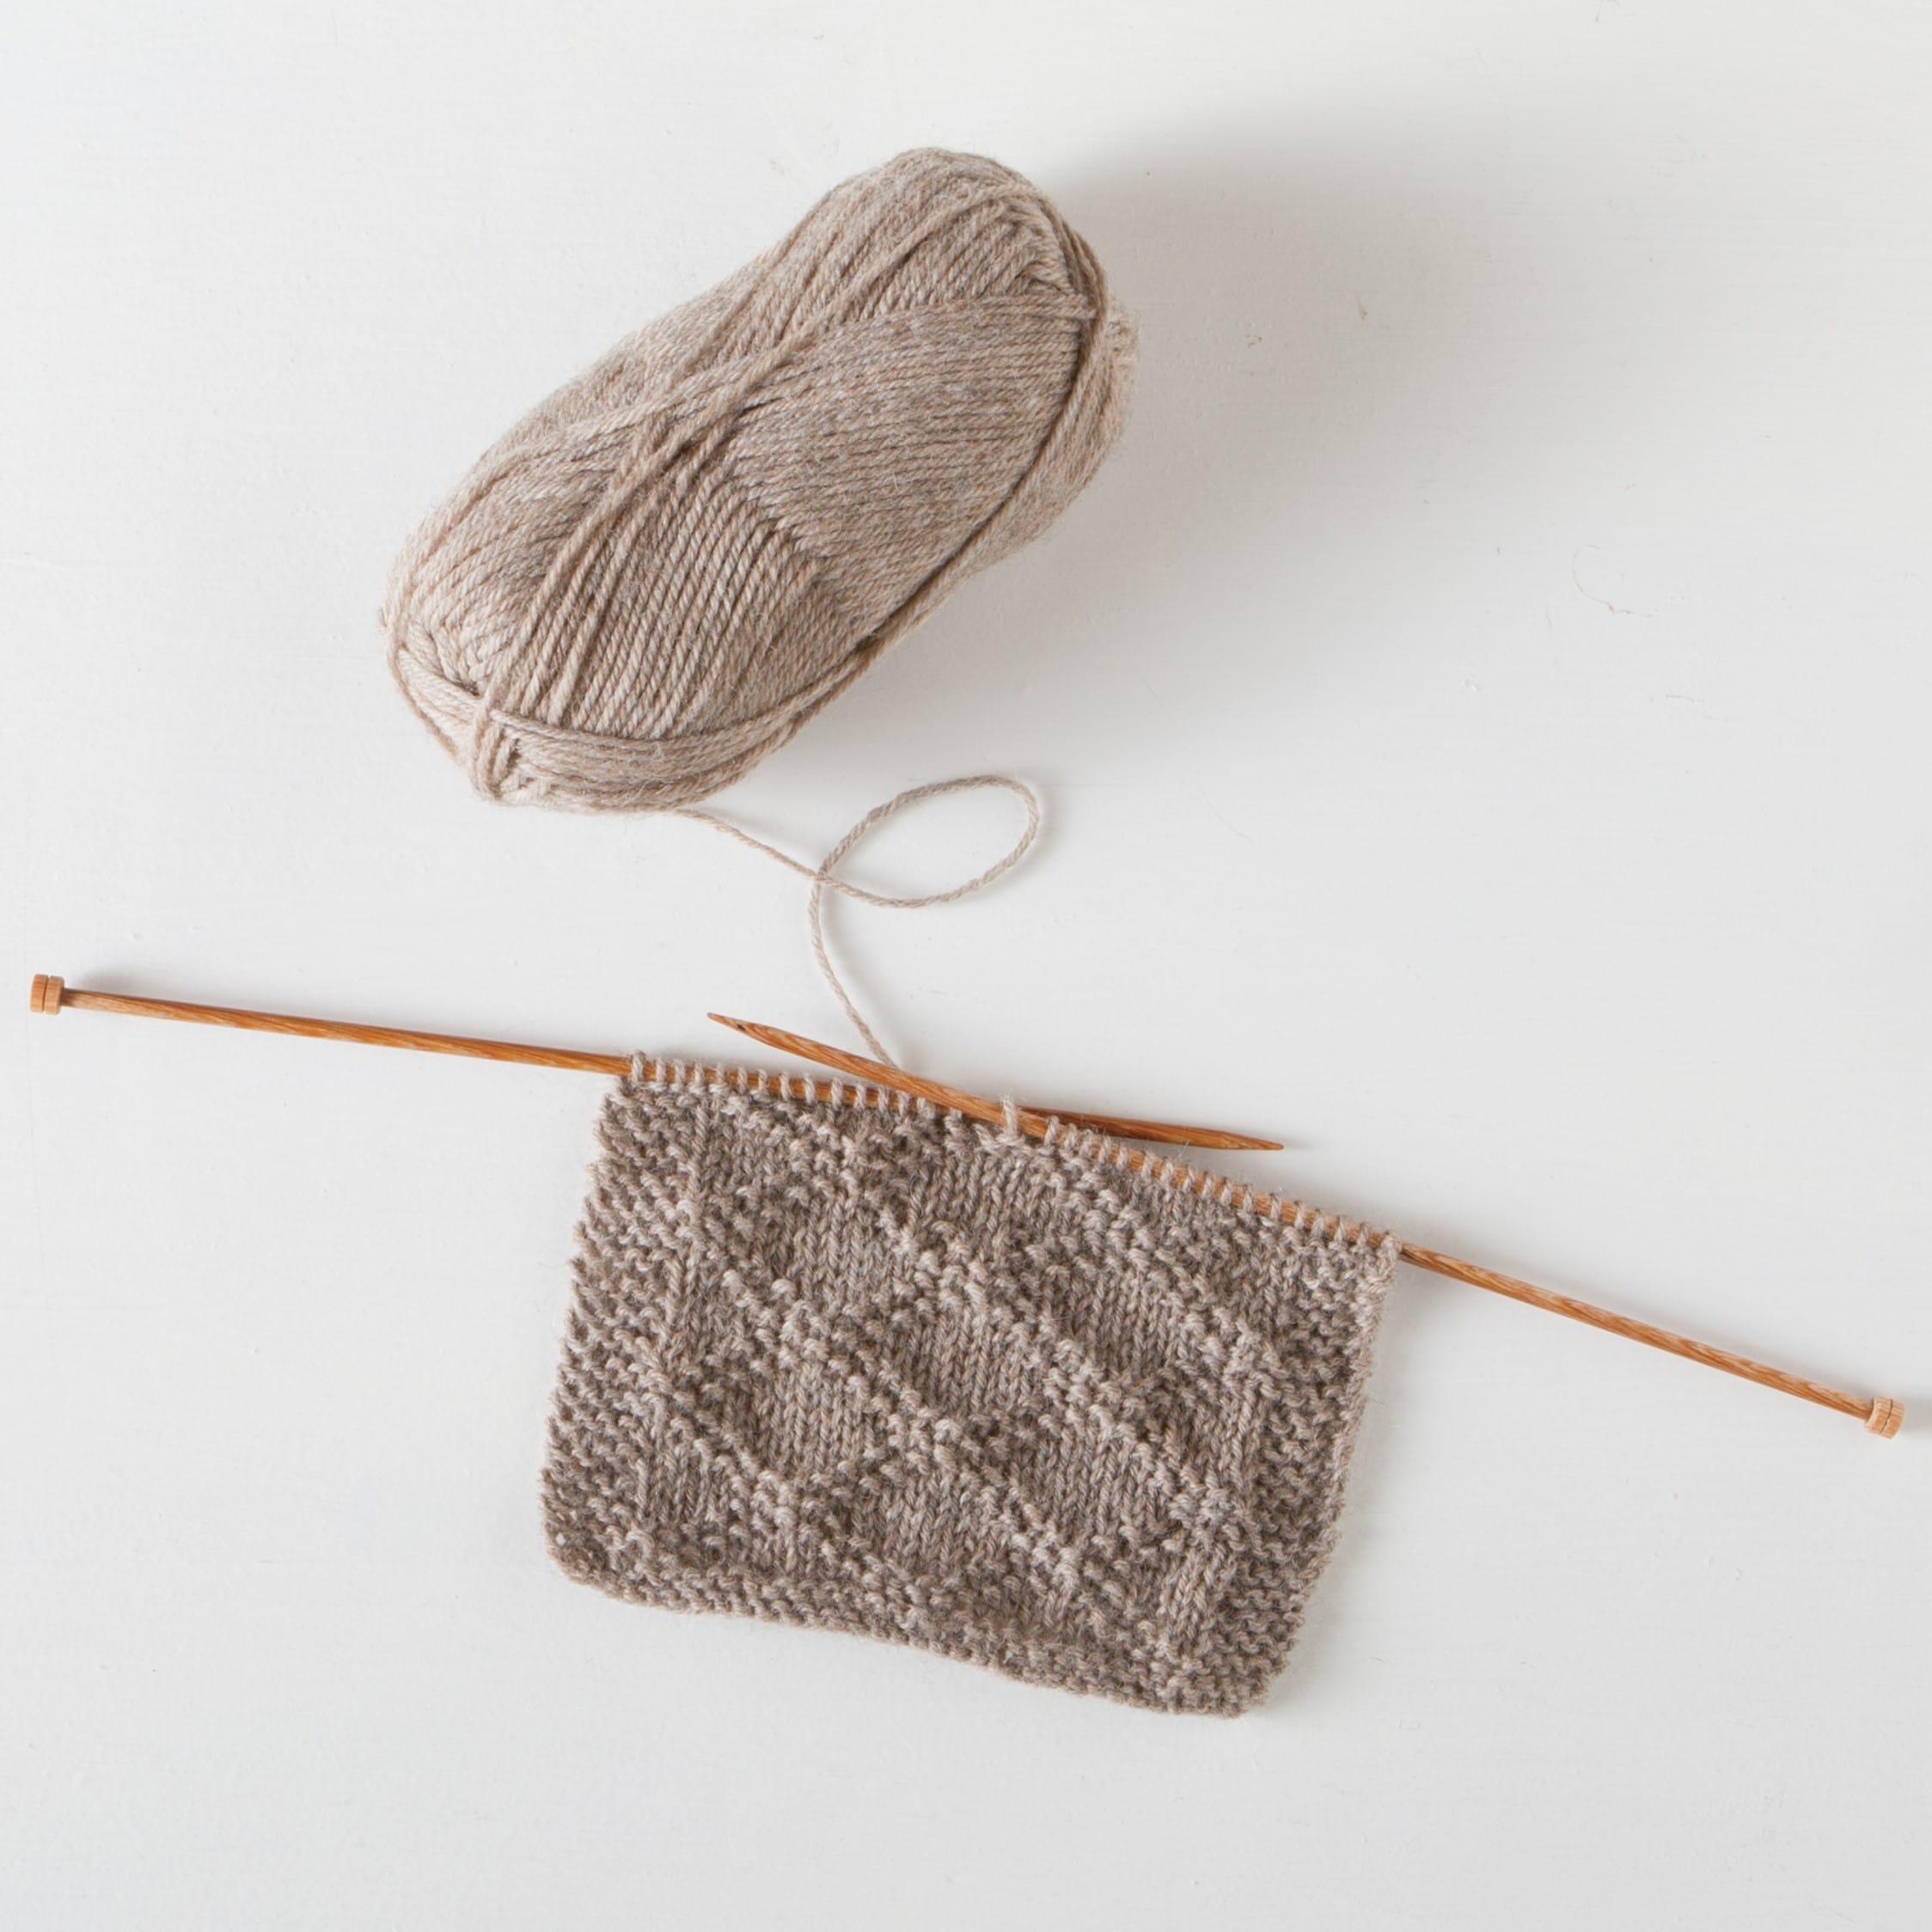 Choosing The Right Cotton Yarn For Your Projects - The Knit Picks Staff  Knitting Blog